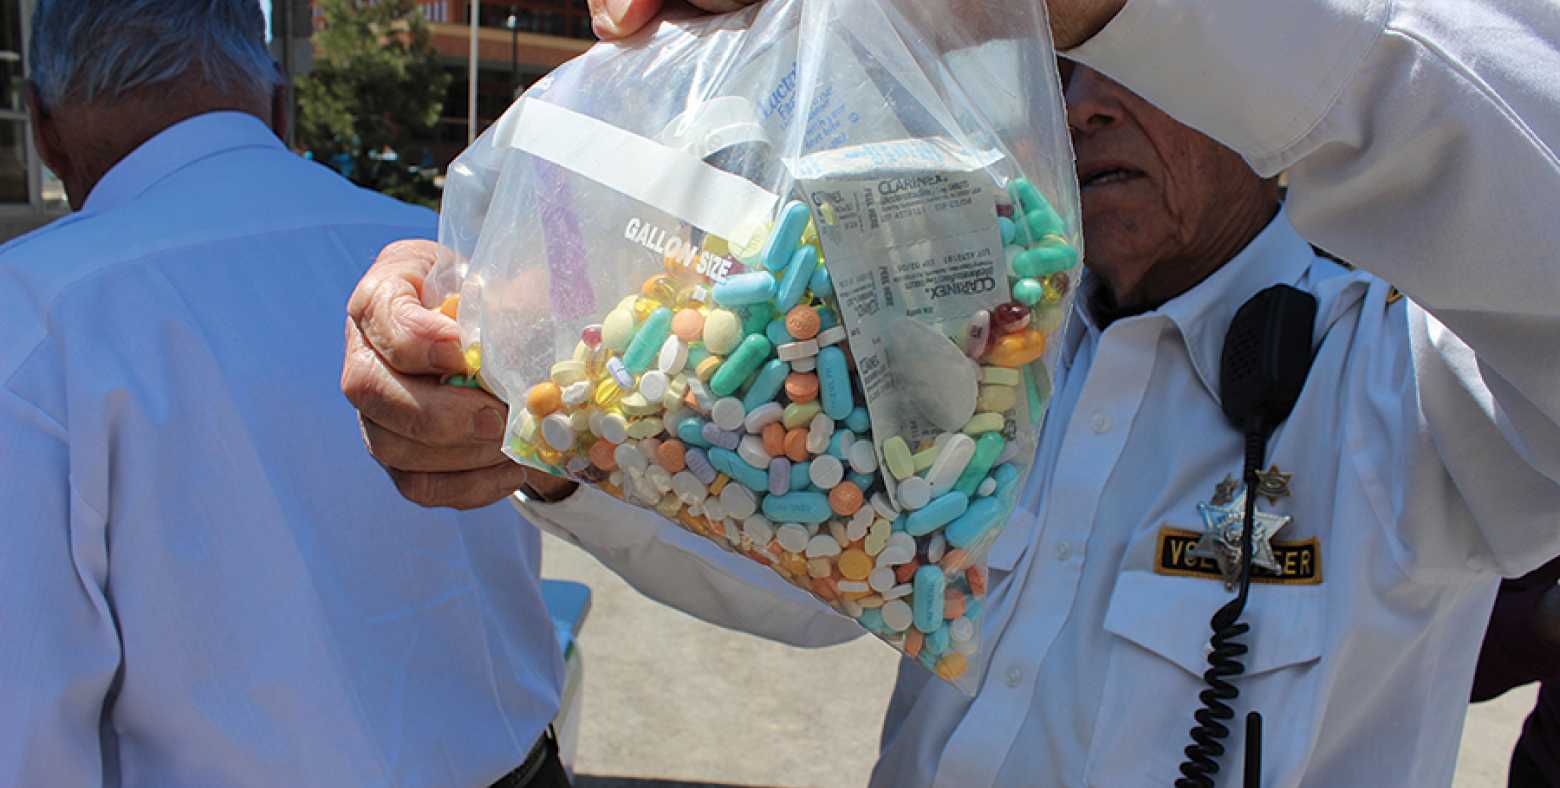 Police officer holding up a bag of opioid pills